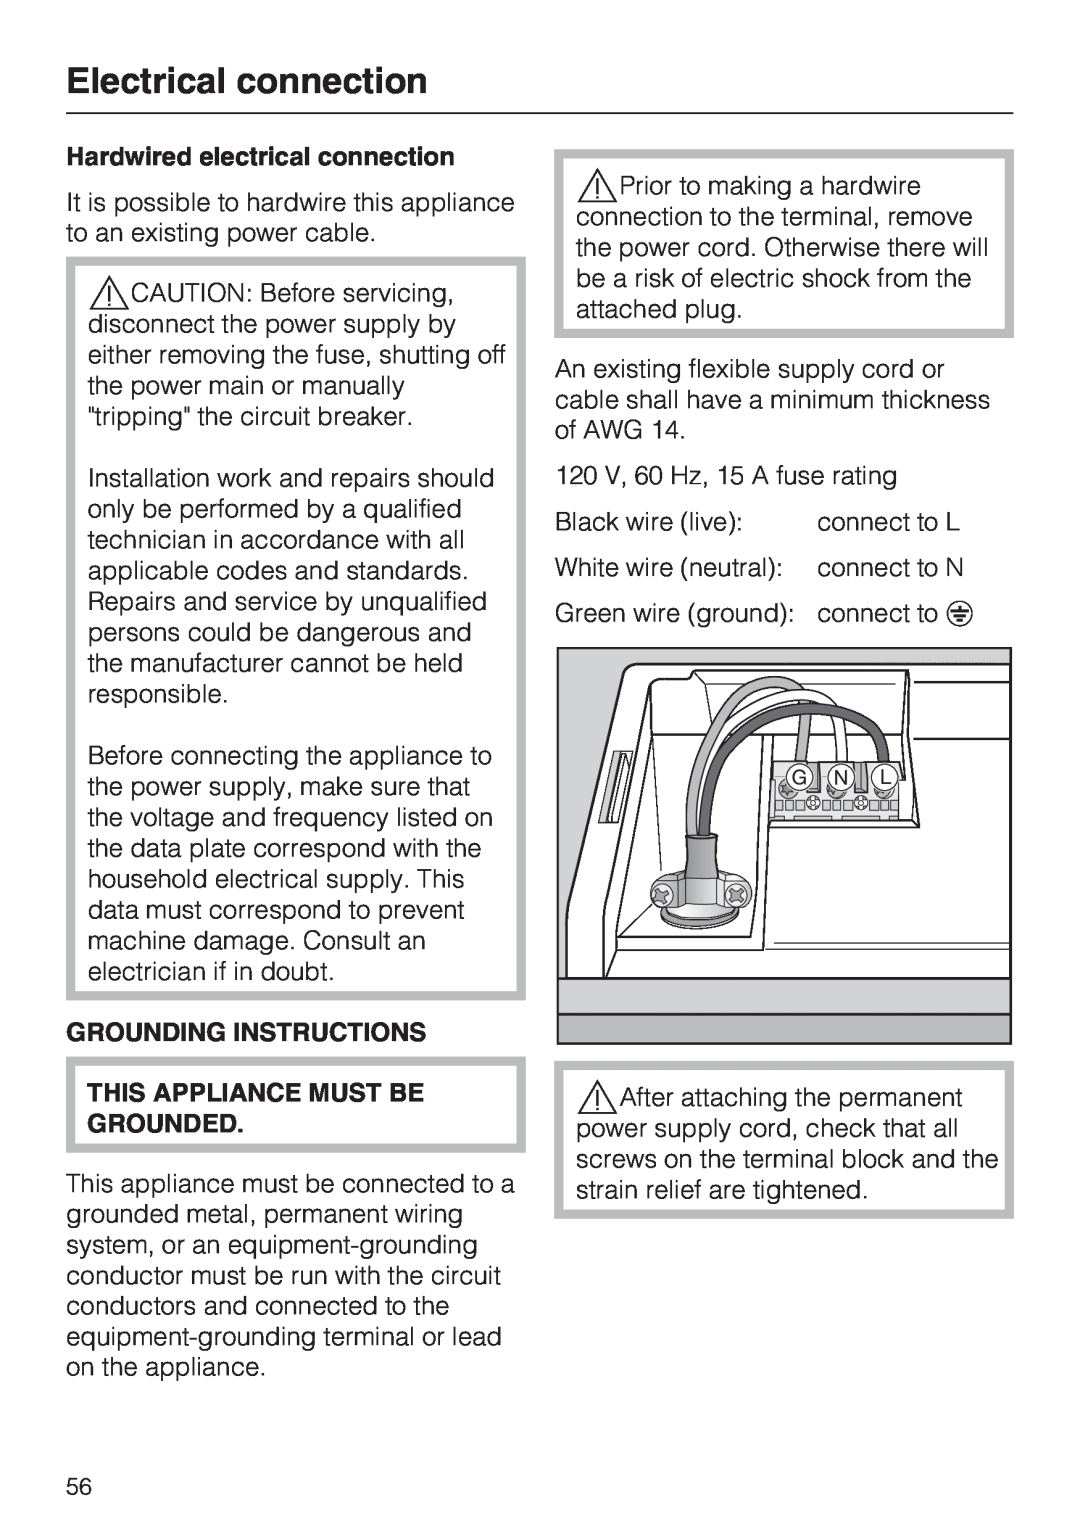 Miele G 5175, G 5170 manual Electrical connection, Hardwired electrical connection, Grounding Instructions 